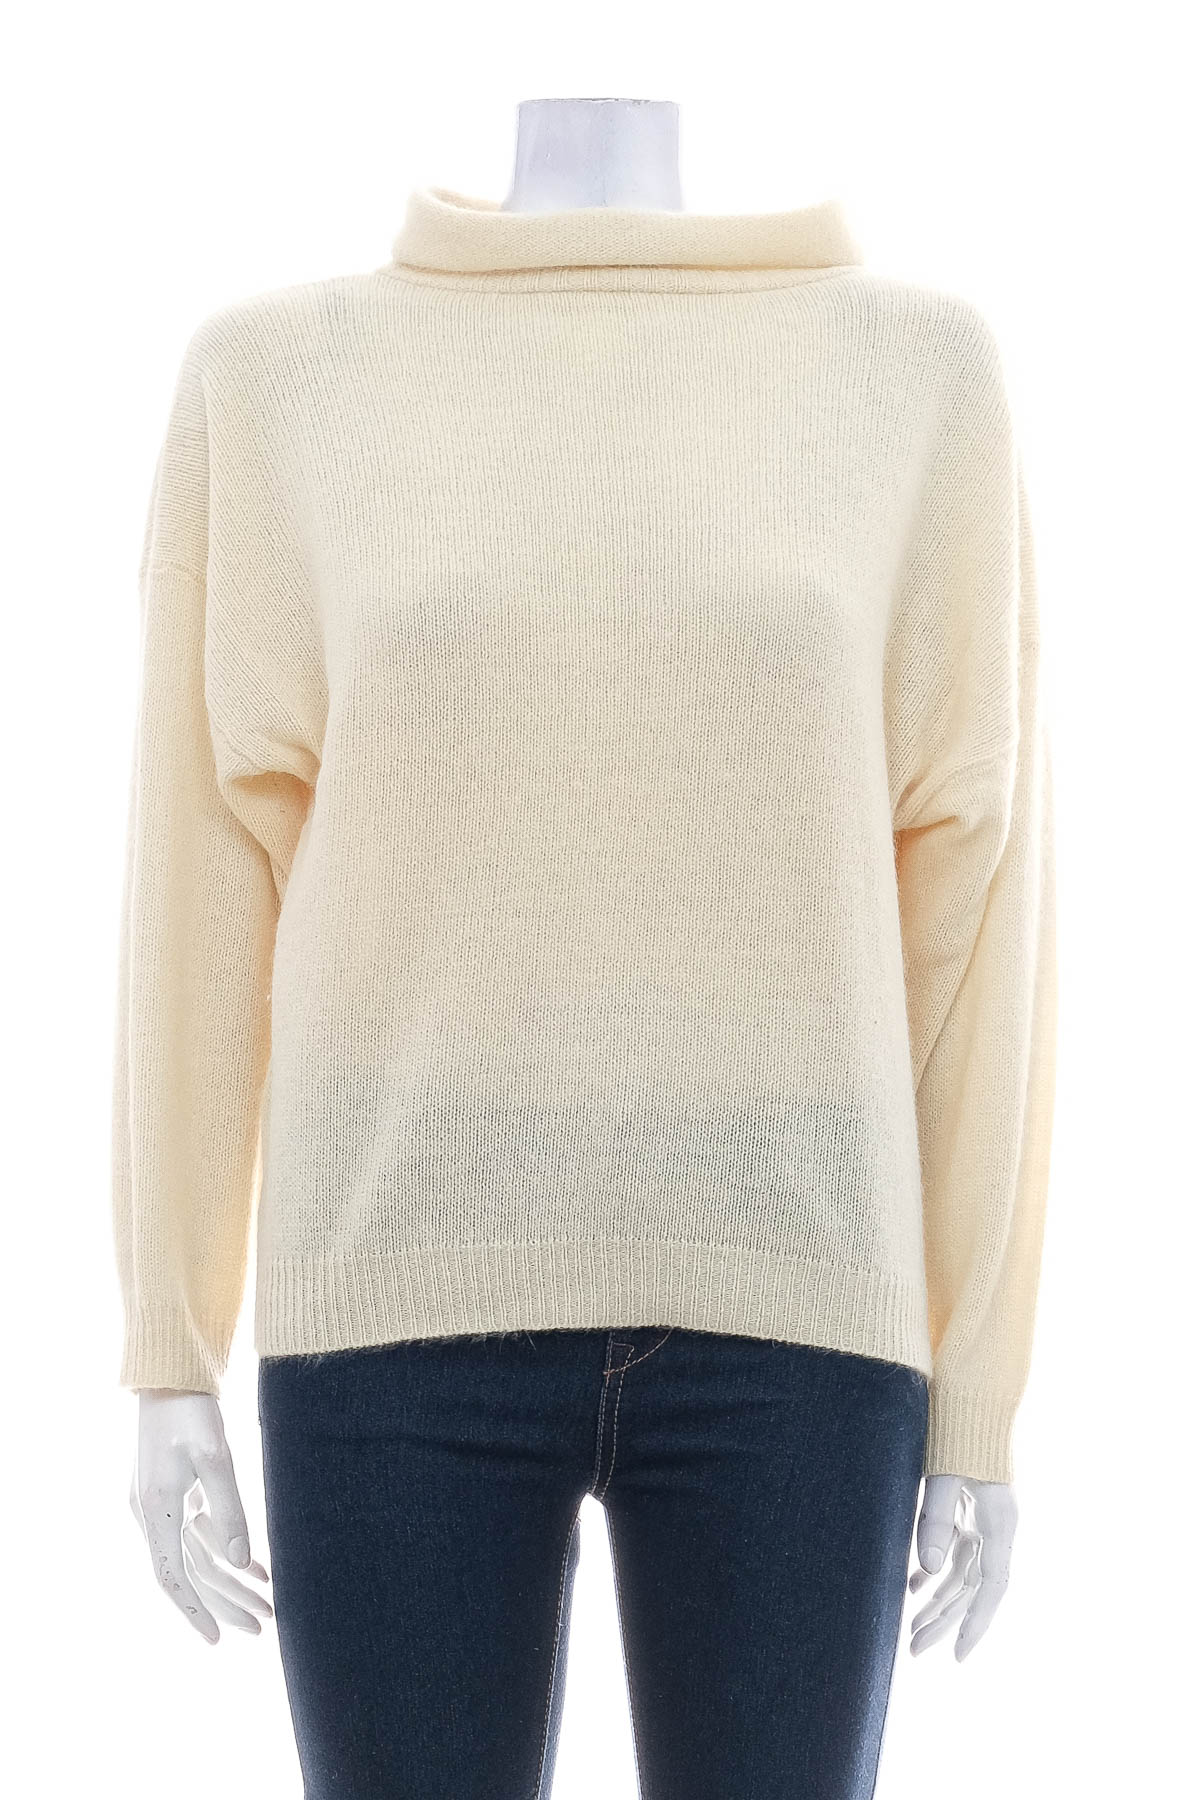 Women's sweater - Anny Cp. - 0